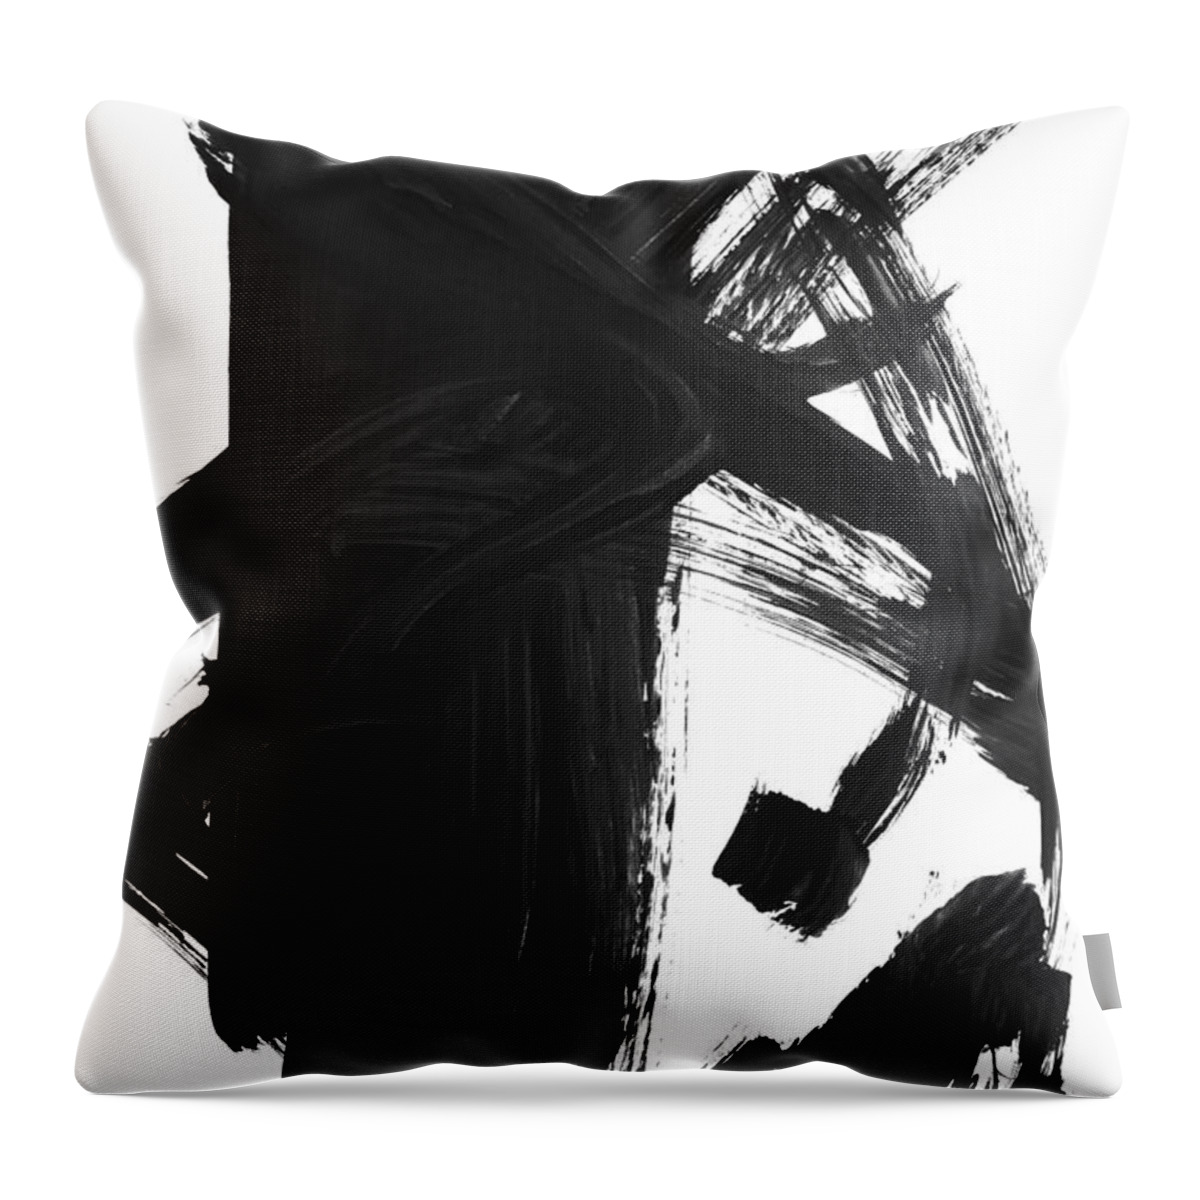 Black And White Throw Pillow featuring the painting 0004-How To Enter by Anke Classen